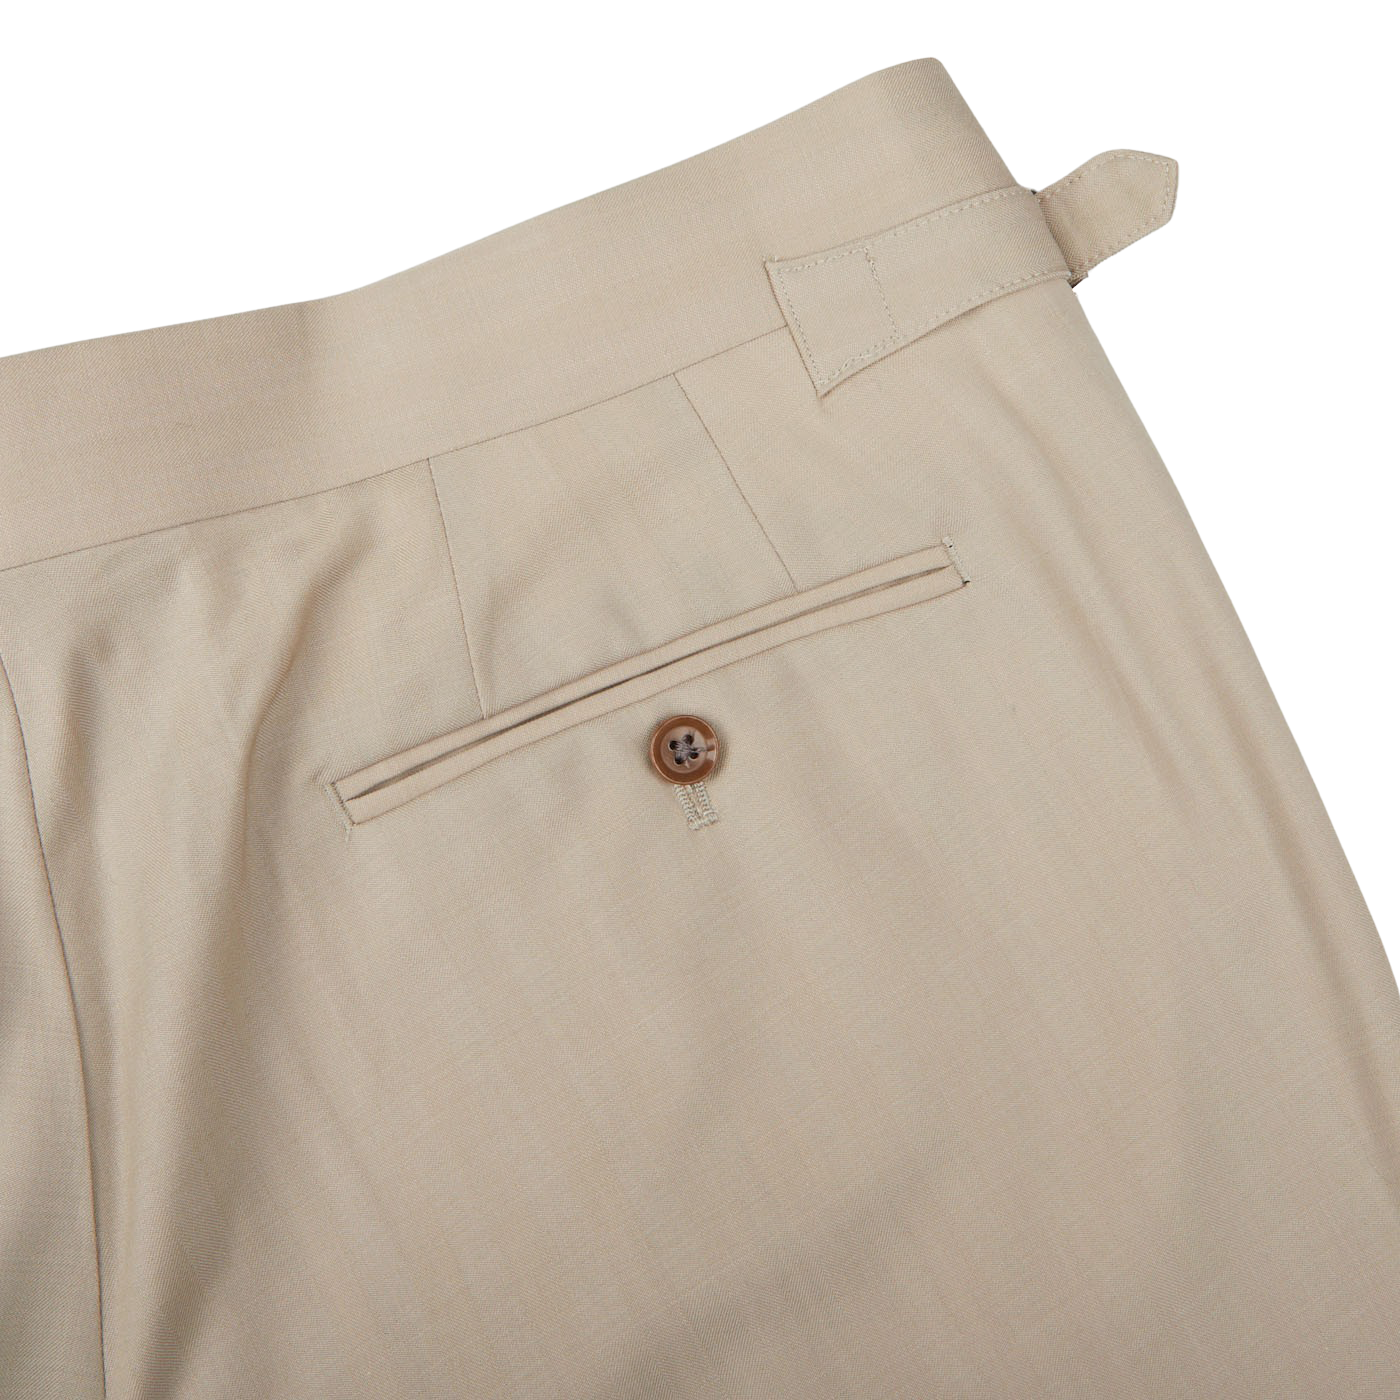 A close up of the Light Beige Herringbone Wool Suit pants by Ring Jacket.